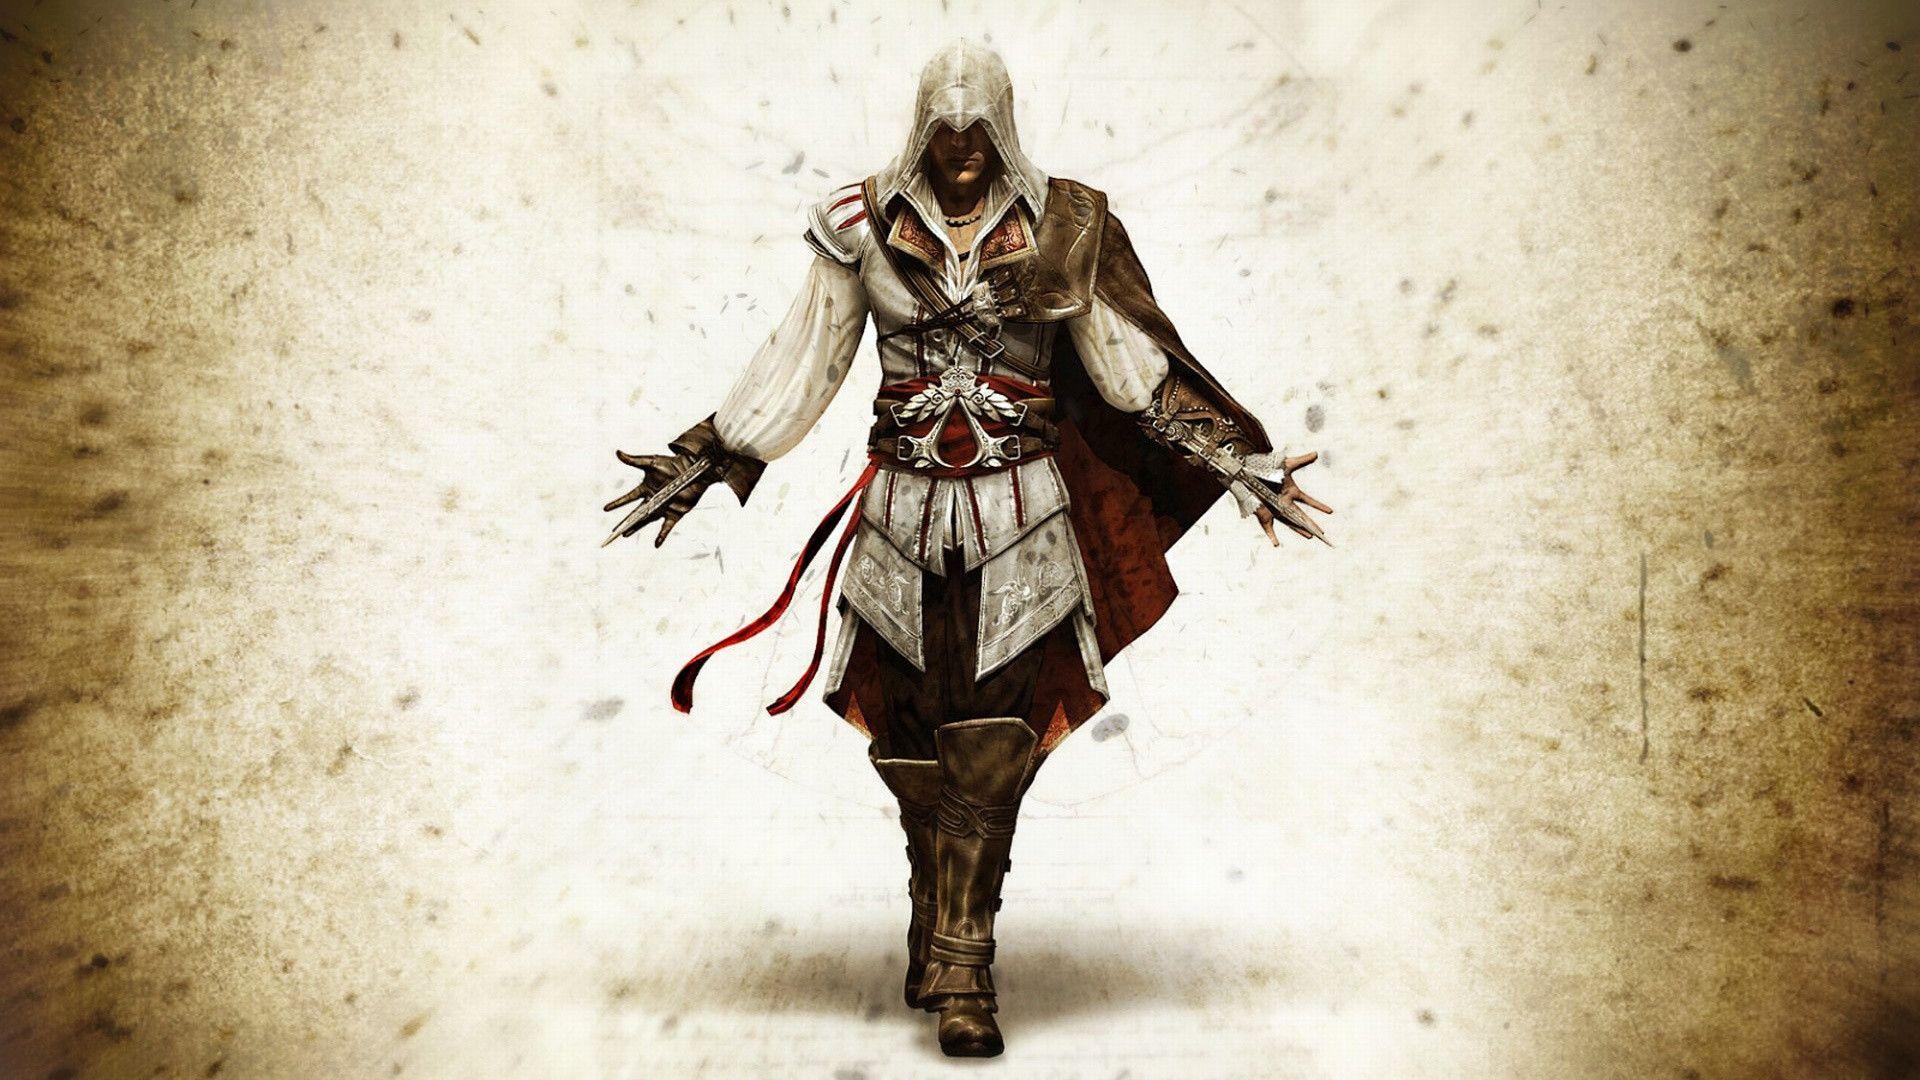 Assassins Creed Old Paper Video Game Heroes Video Games Video Game Art 1920x1080